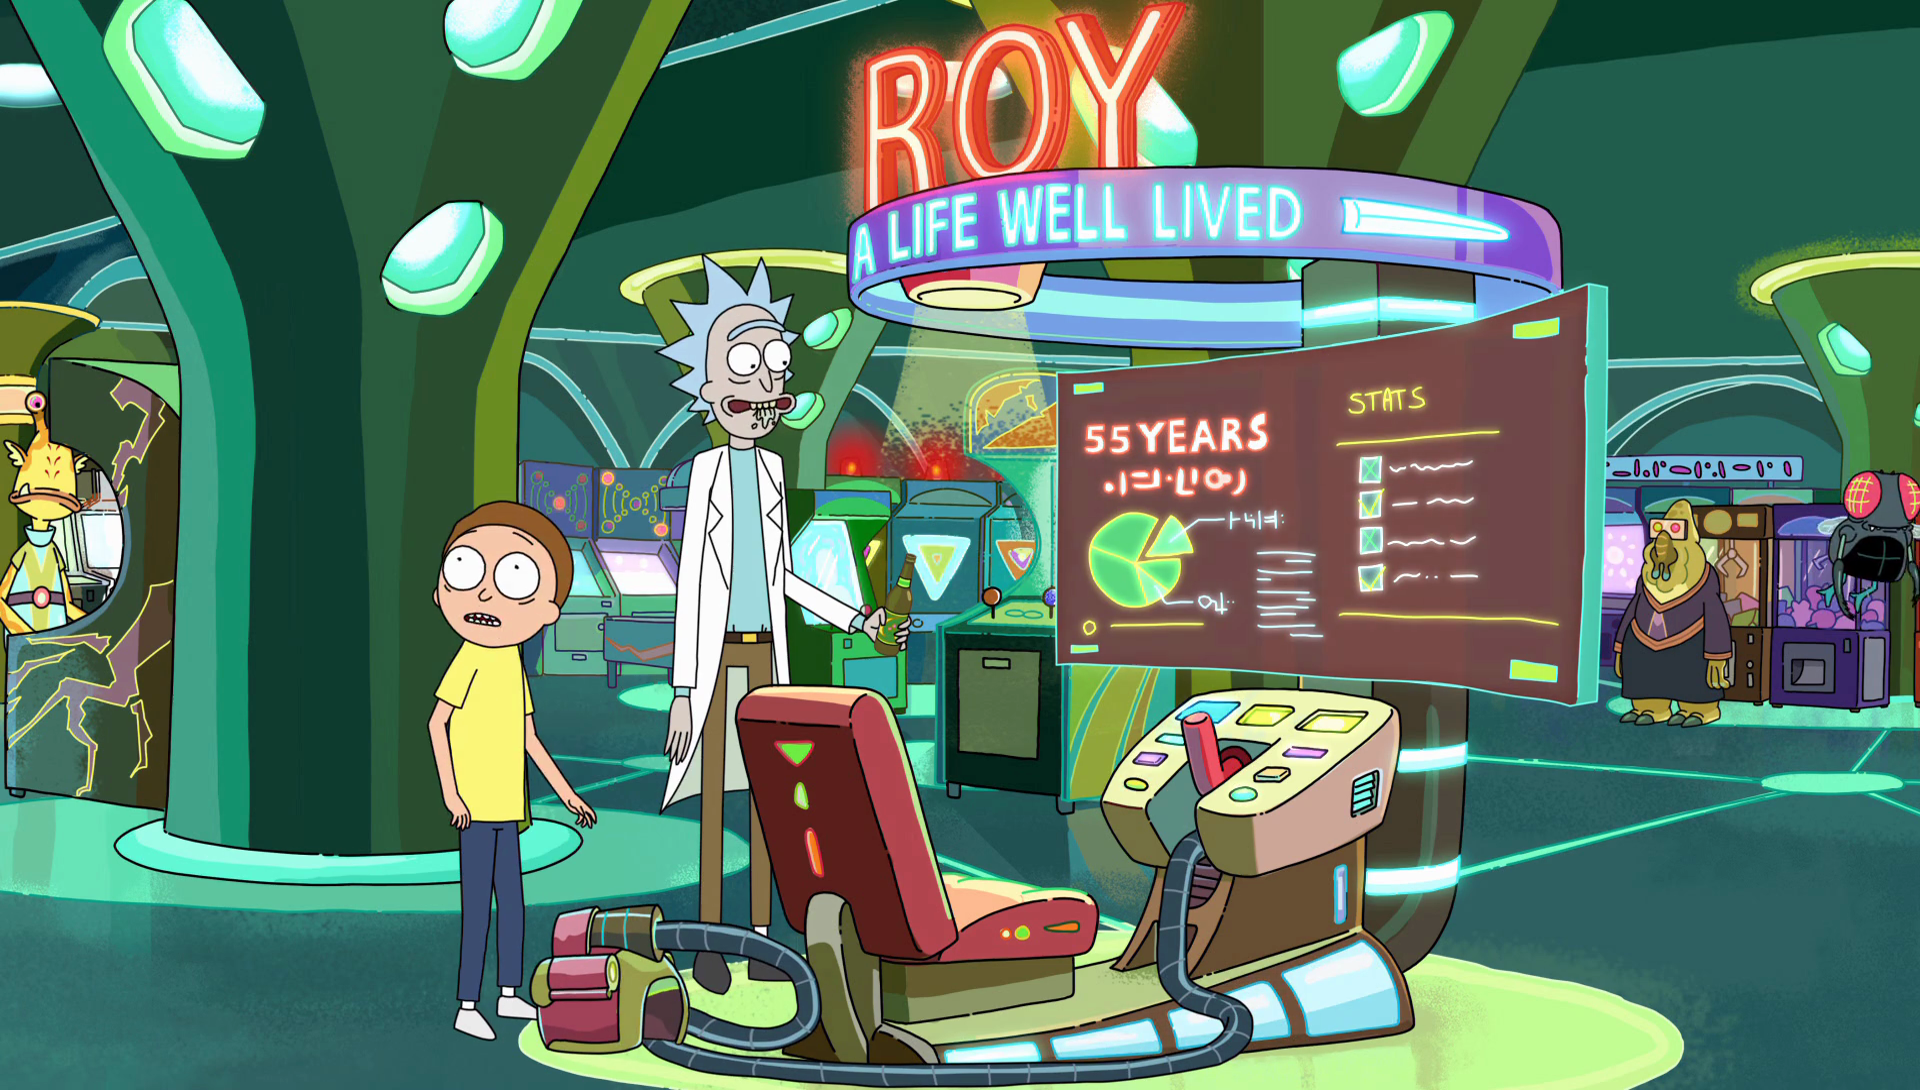 Roy A Life Well Lived Rick And Morty Wiki Fandom Powered By Wikia - roy a life well lived